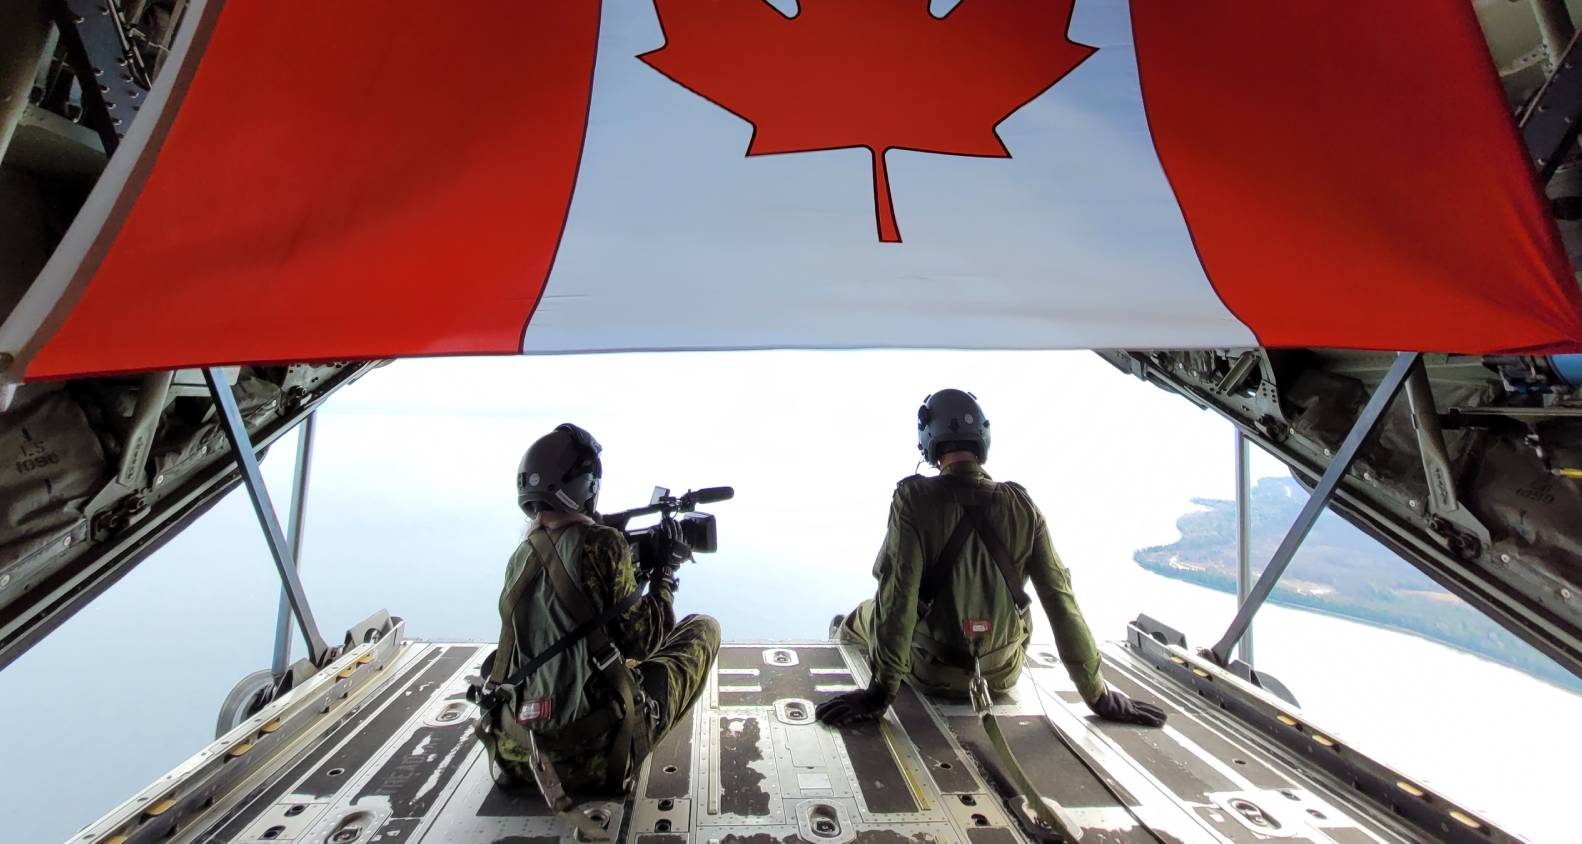 Soldiers with a Canadian flag